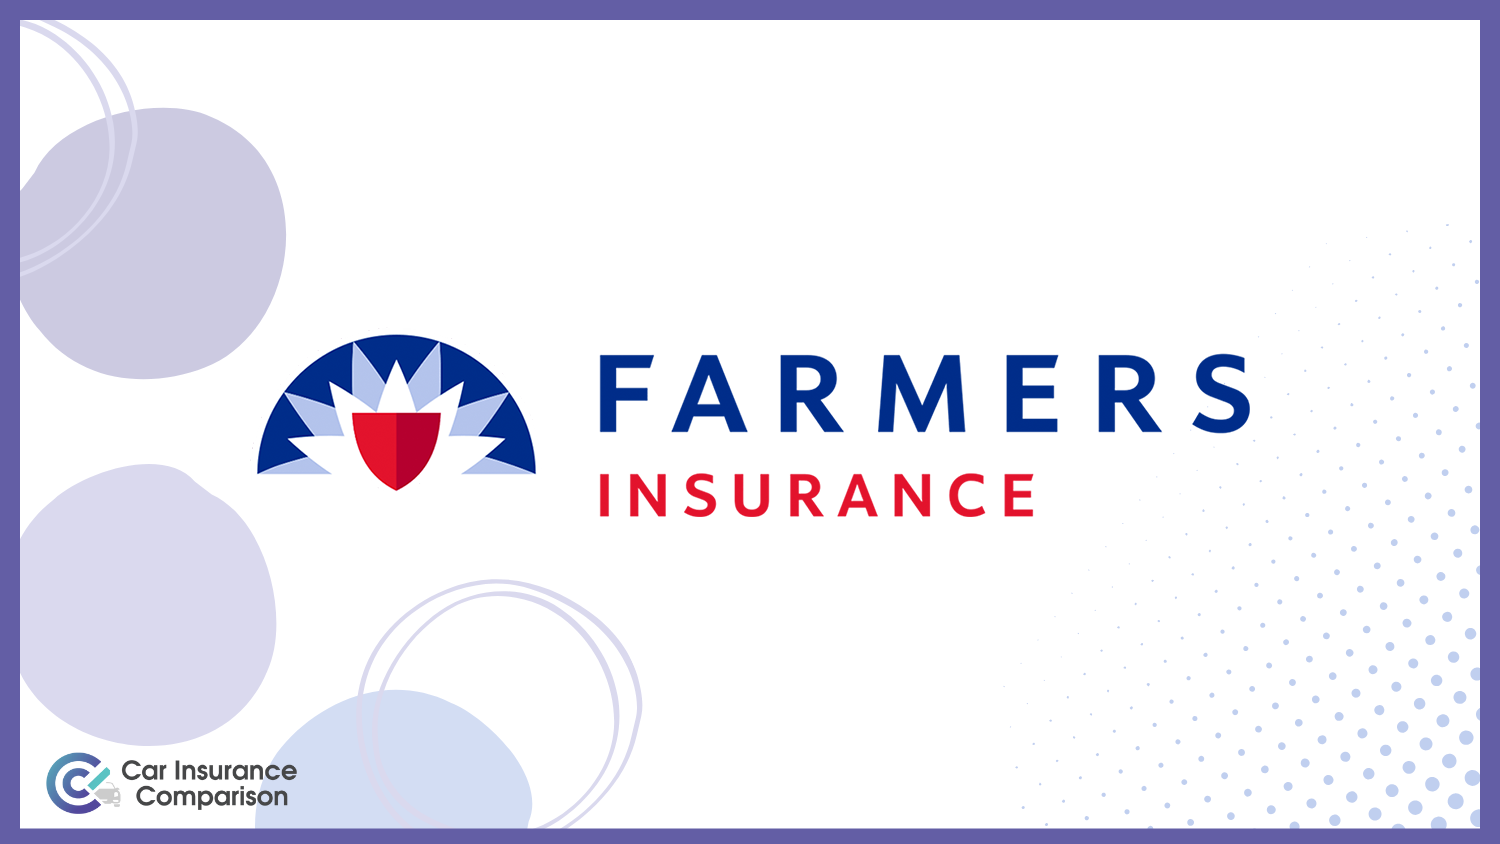 Farmers: Compare Professional Engineer Car Insurance Rates